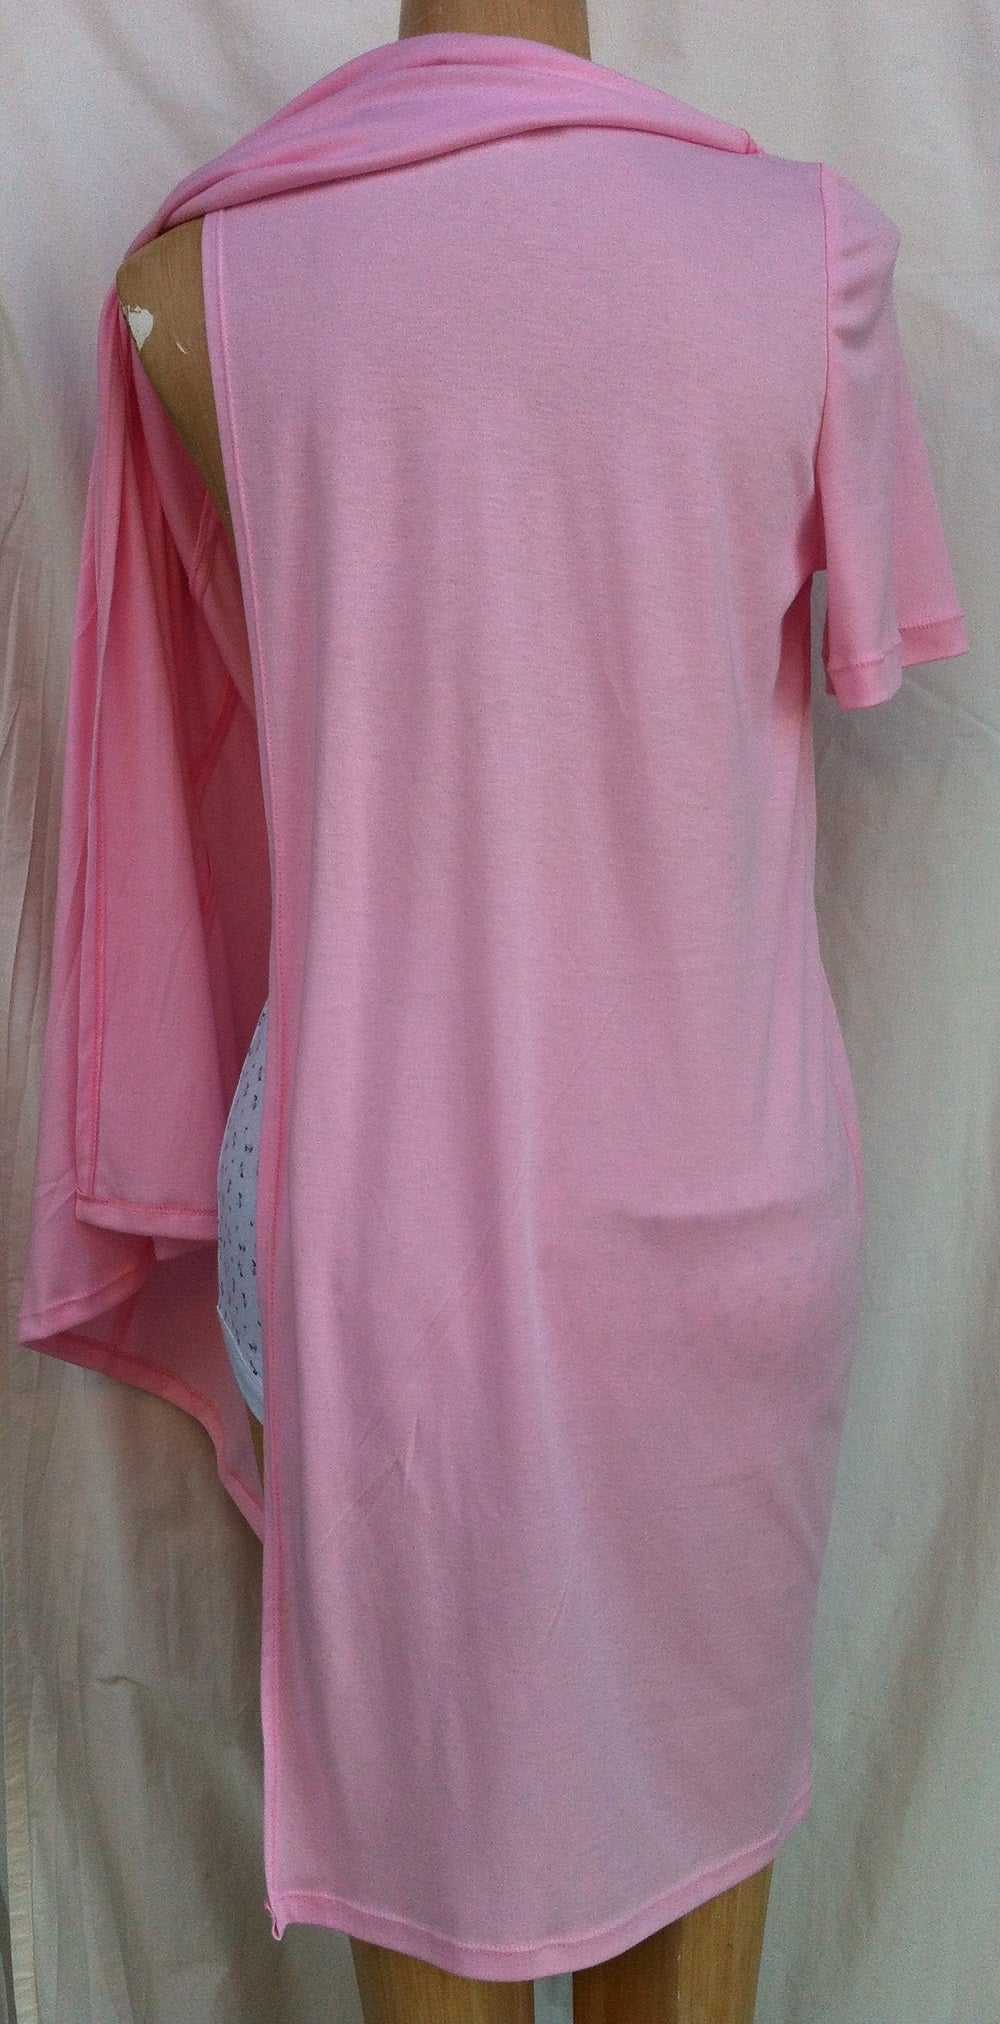 (L6) Ladies Nightie - Short  Sleeves - PINK with Blue & White Neck Band - Adaptive Fitz Clothing